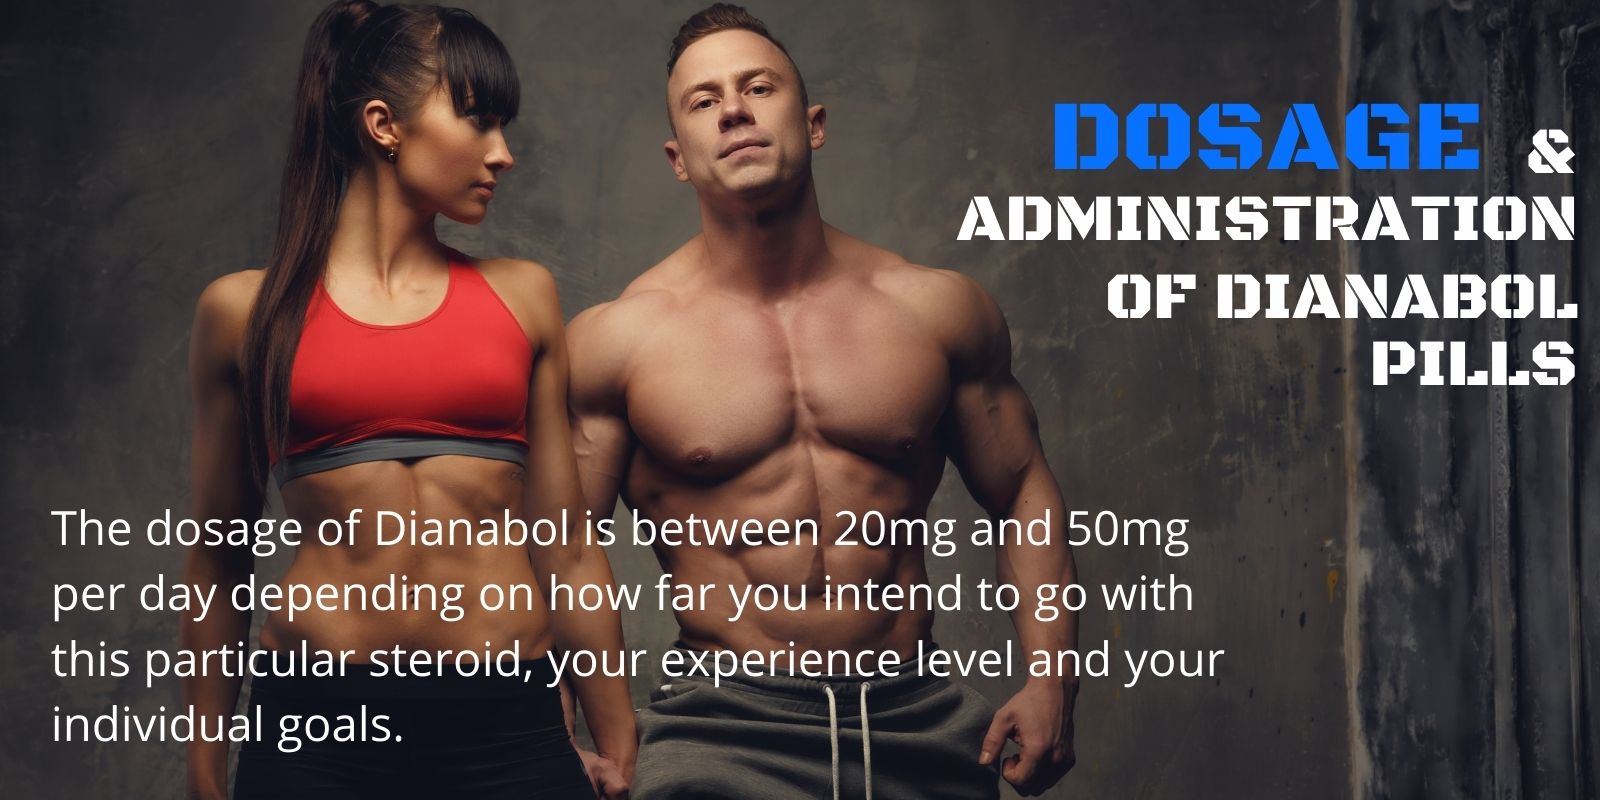 Dosage and Administration of Dianabol Pills